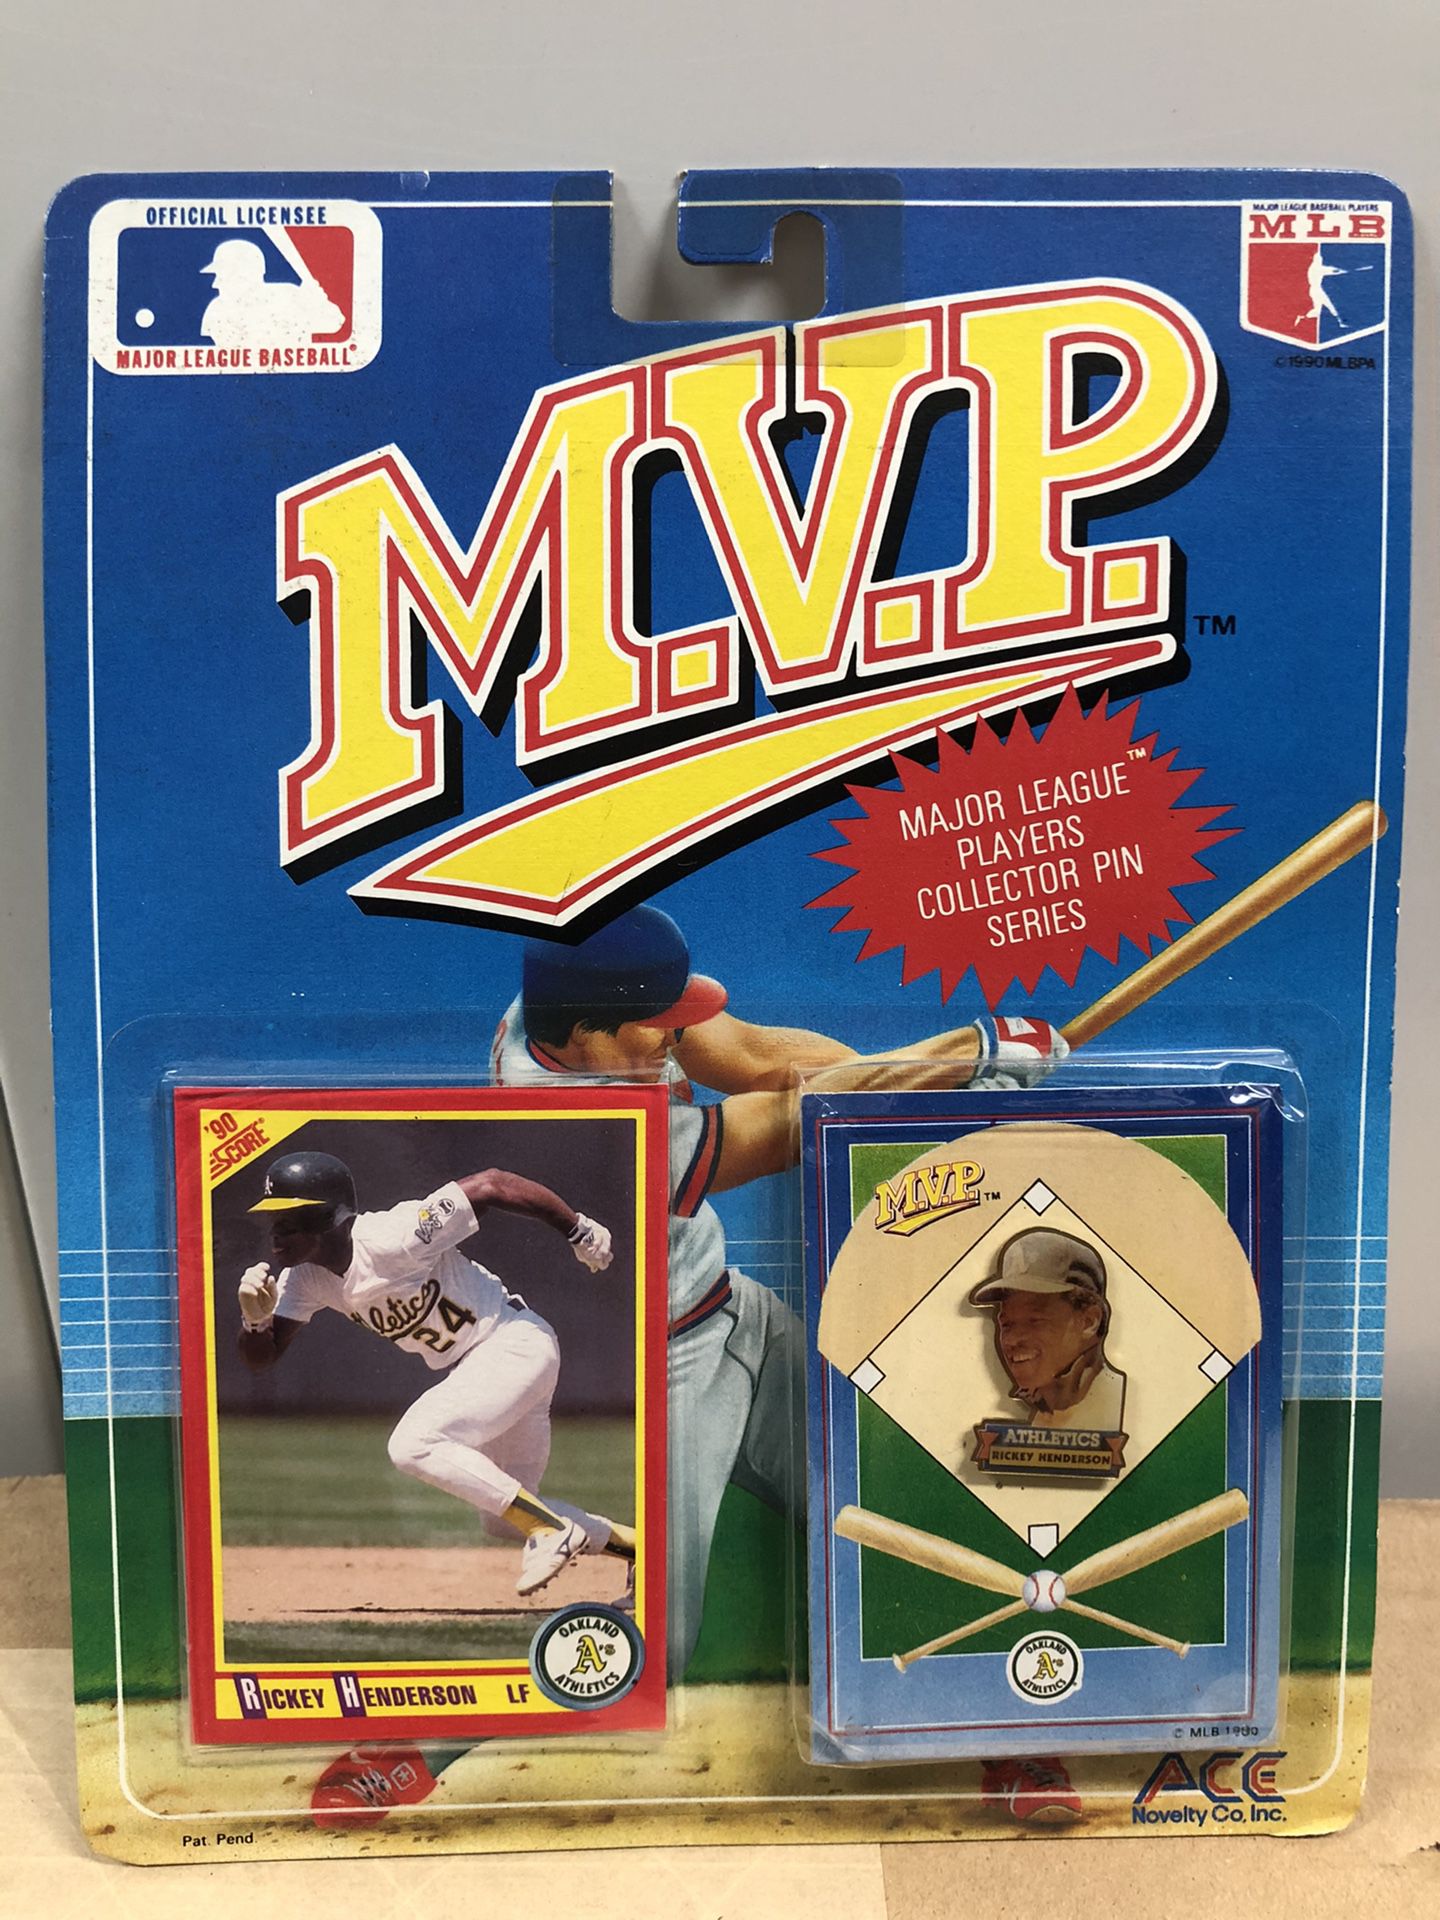 Oakland A’s Rickey Henderson MVP First Edition Major League Players Collector Pin Series with Baseball Card *UNOPENED*